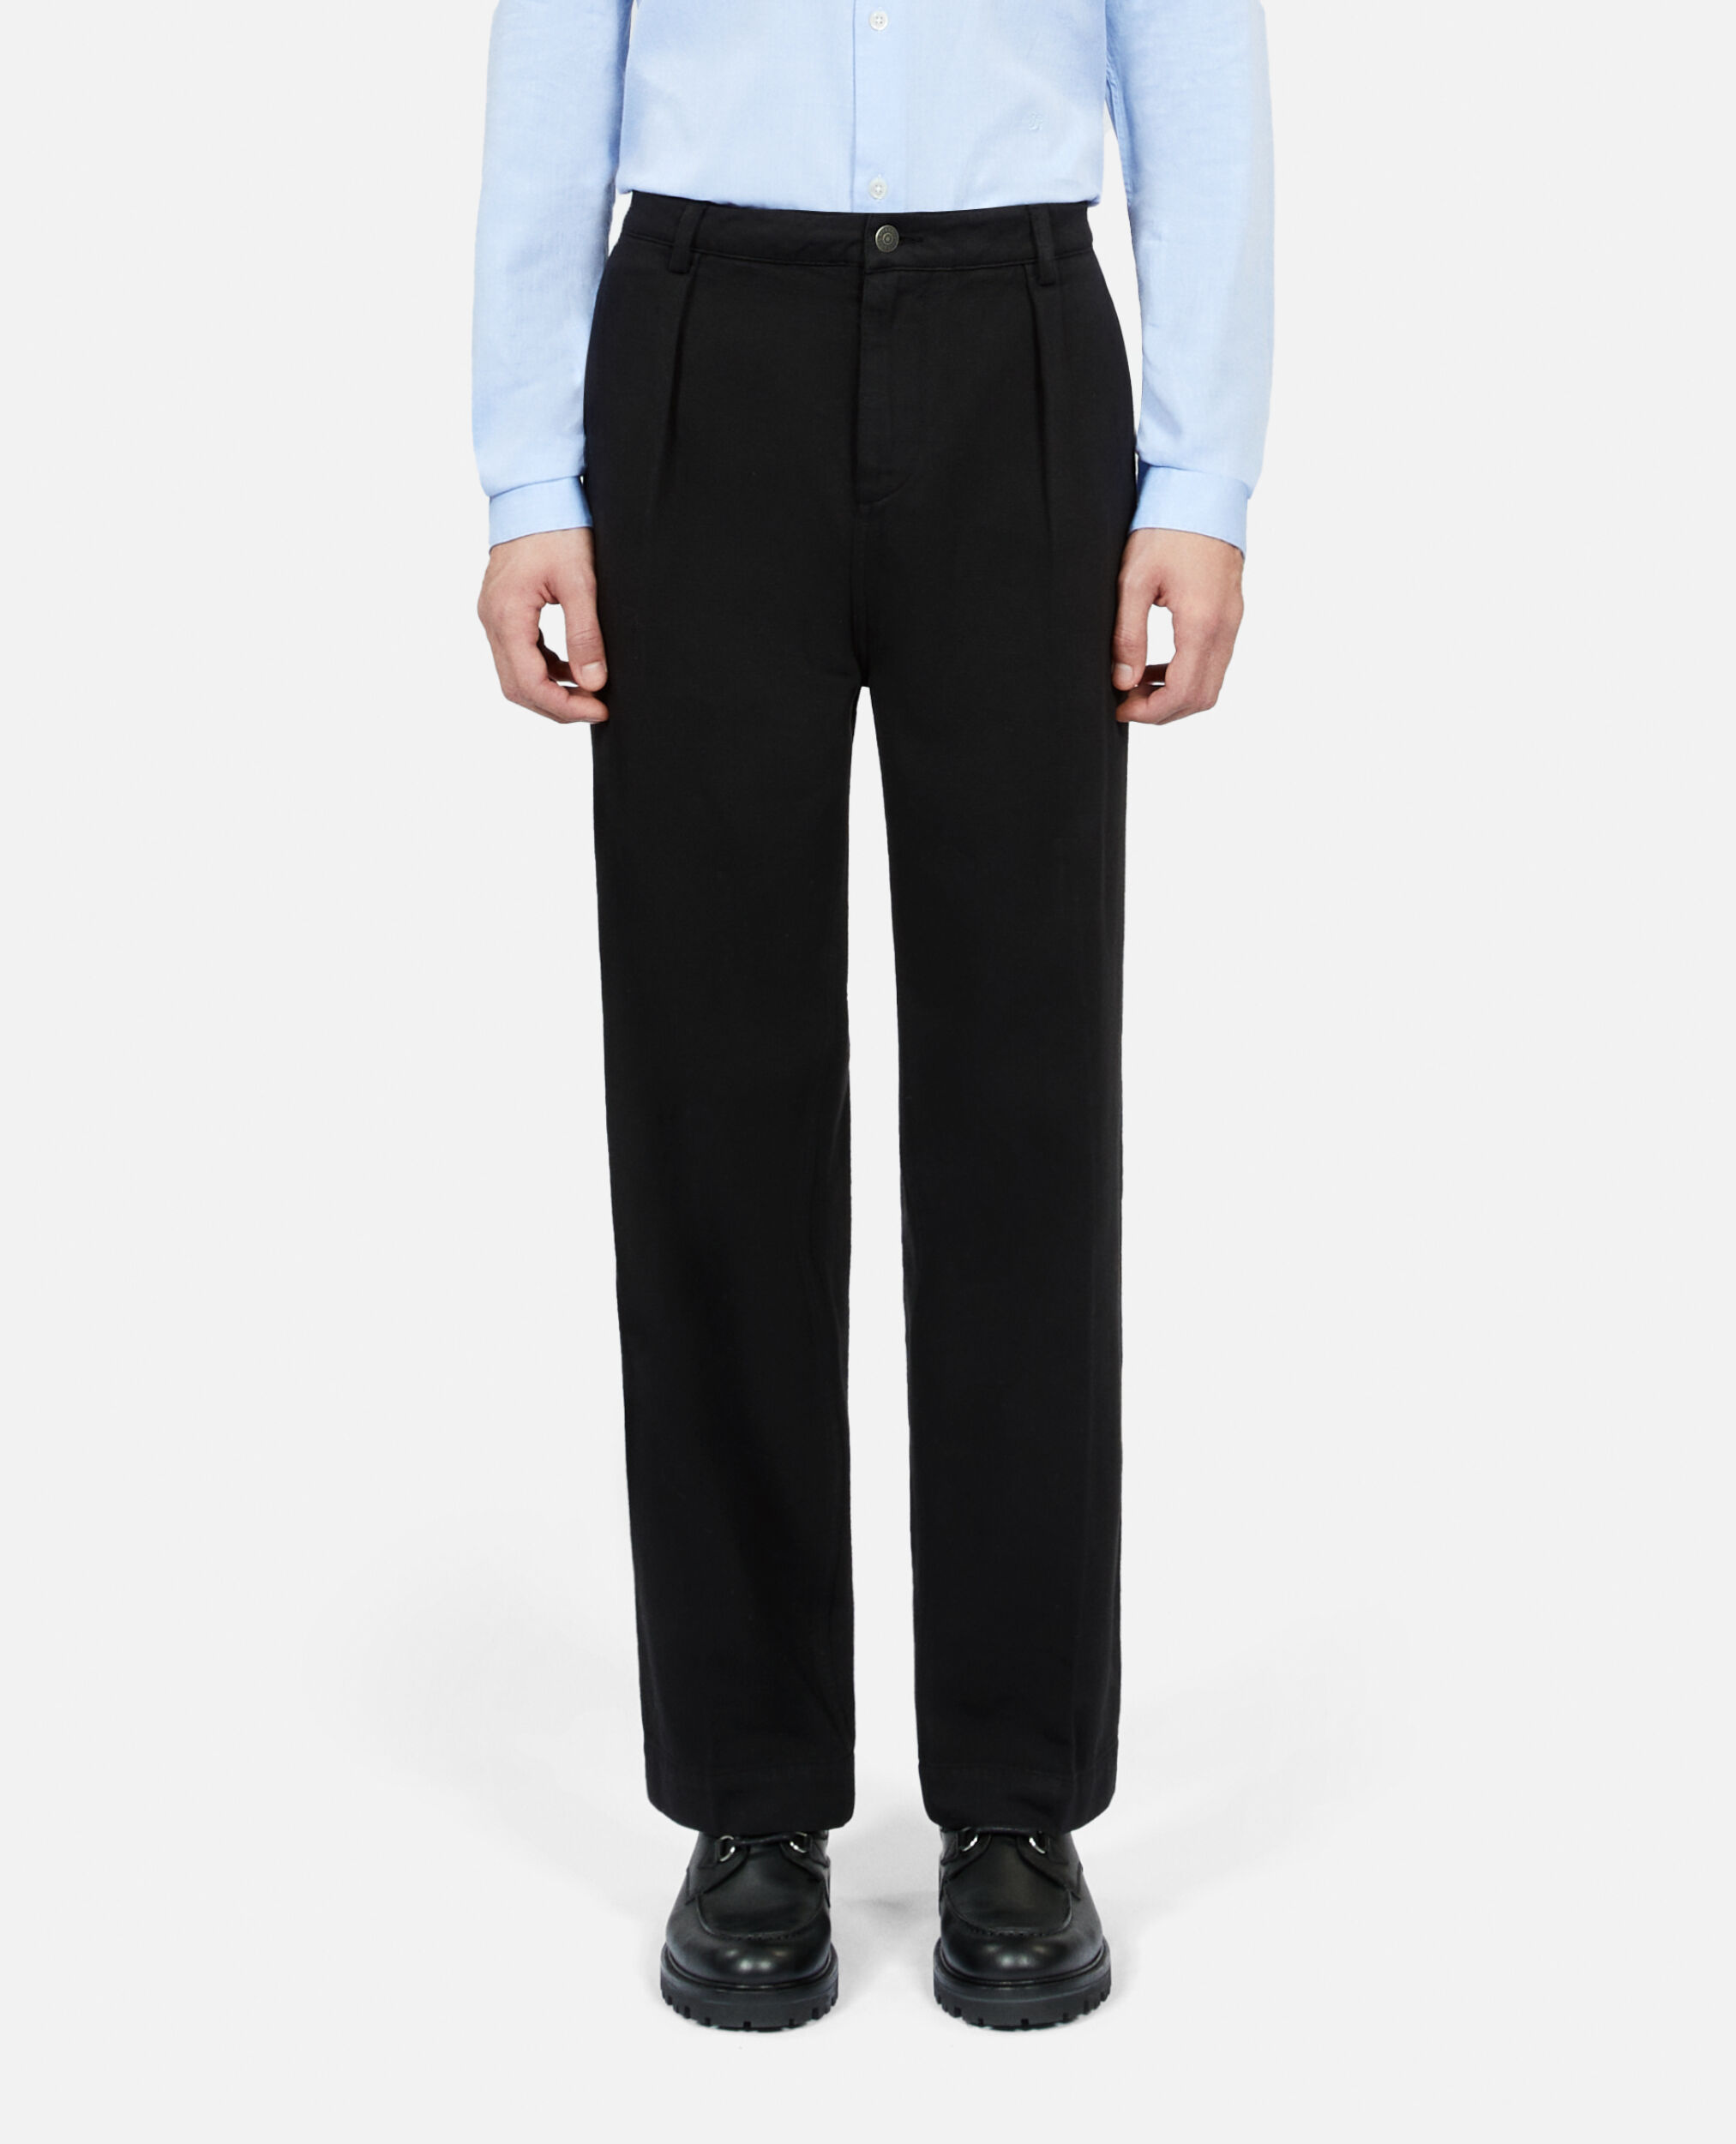 Black cotton and linen trousers with pleats, BLACK, hi-res image number null